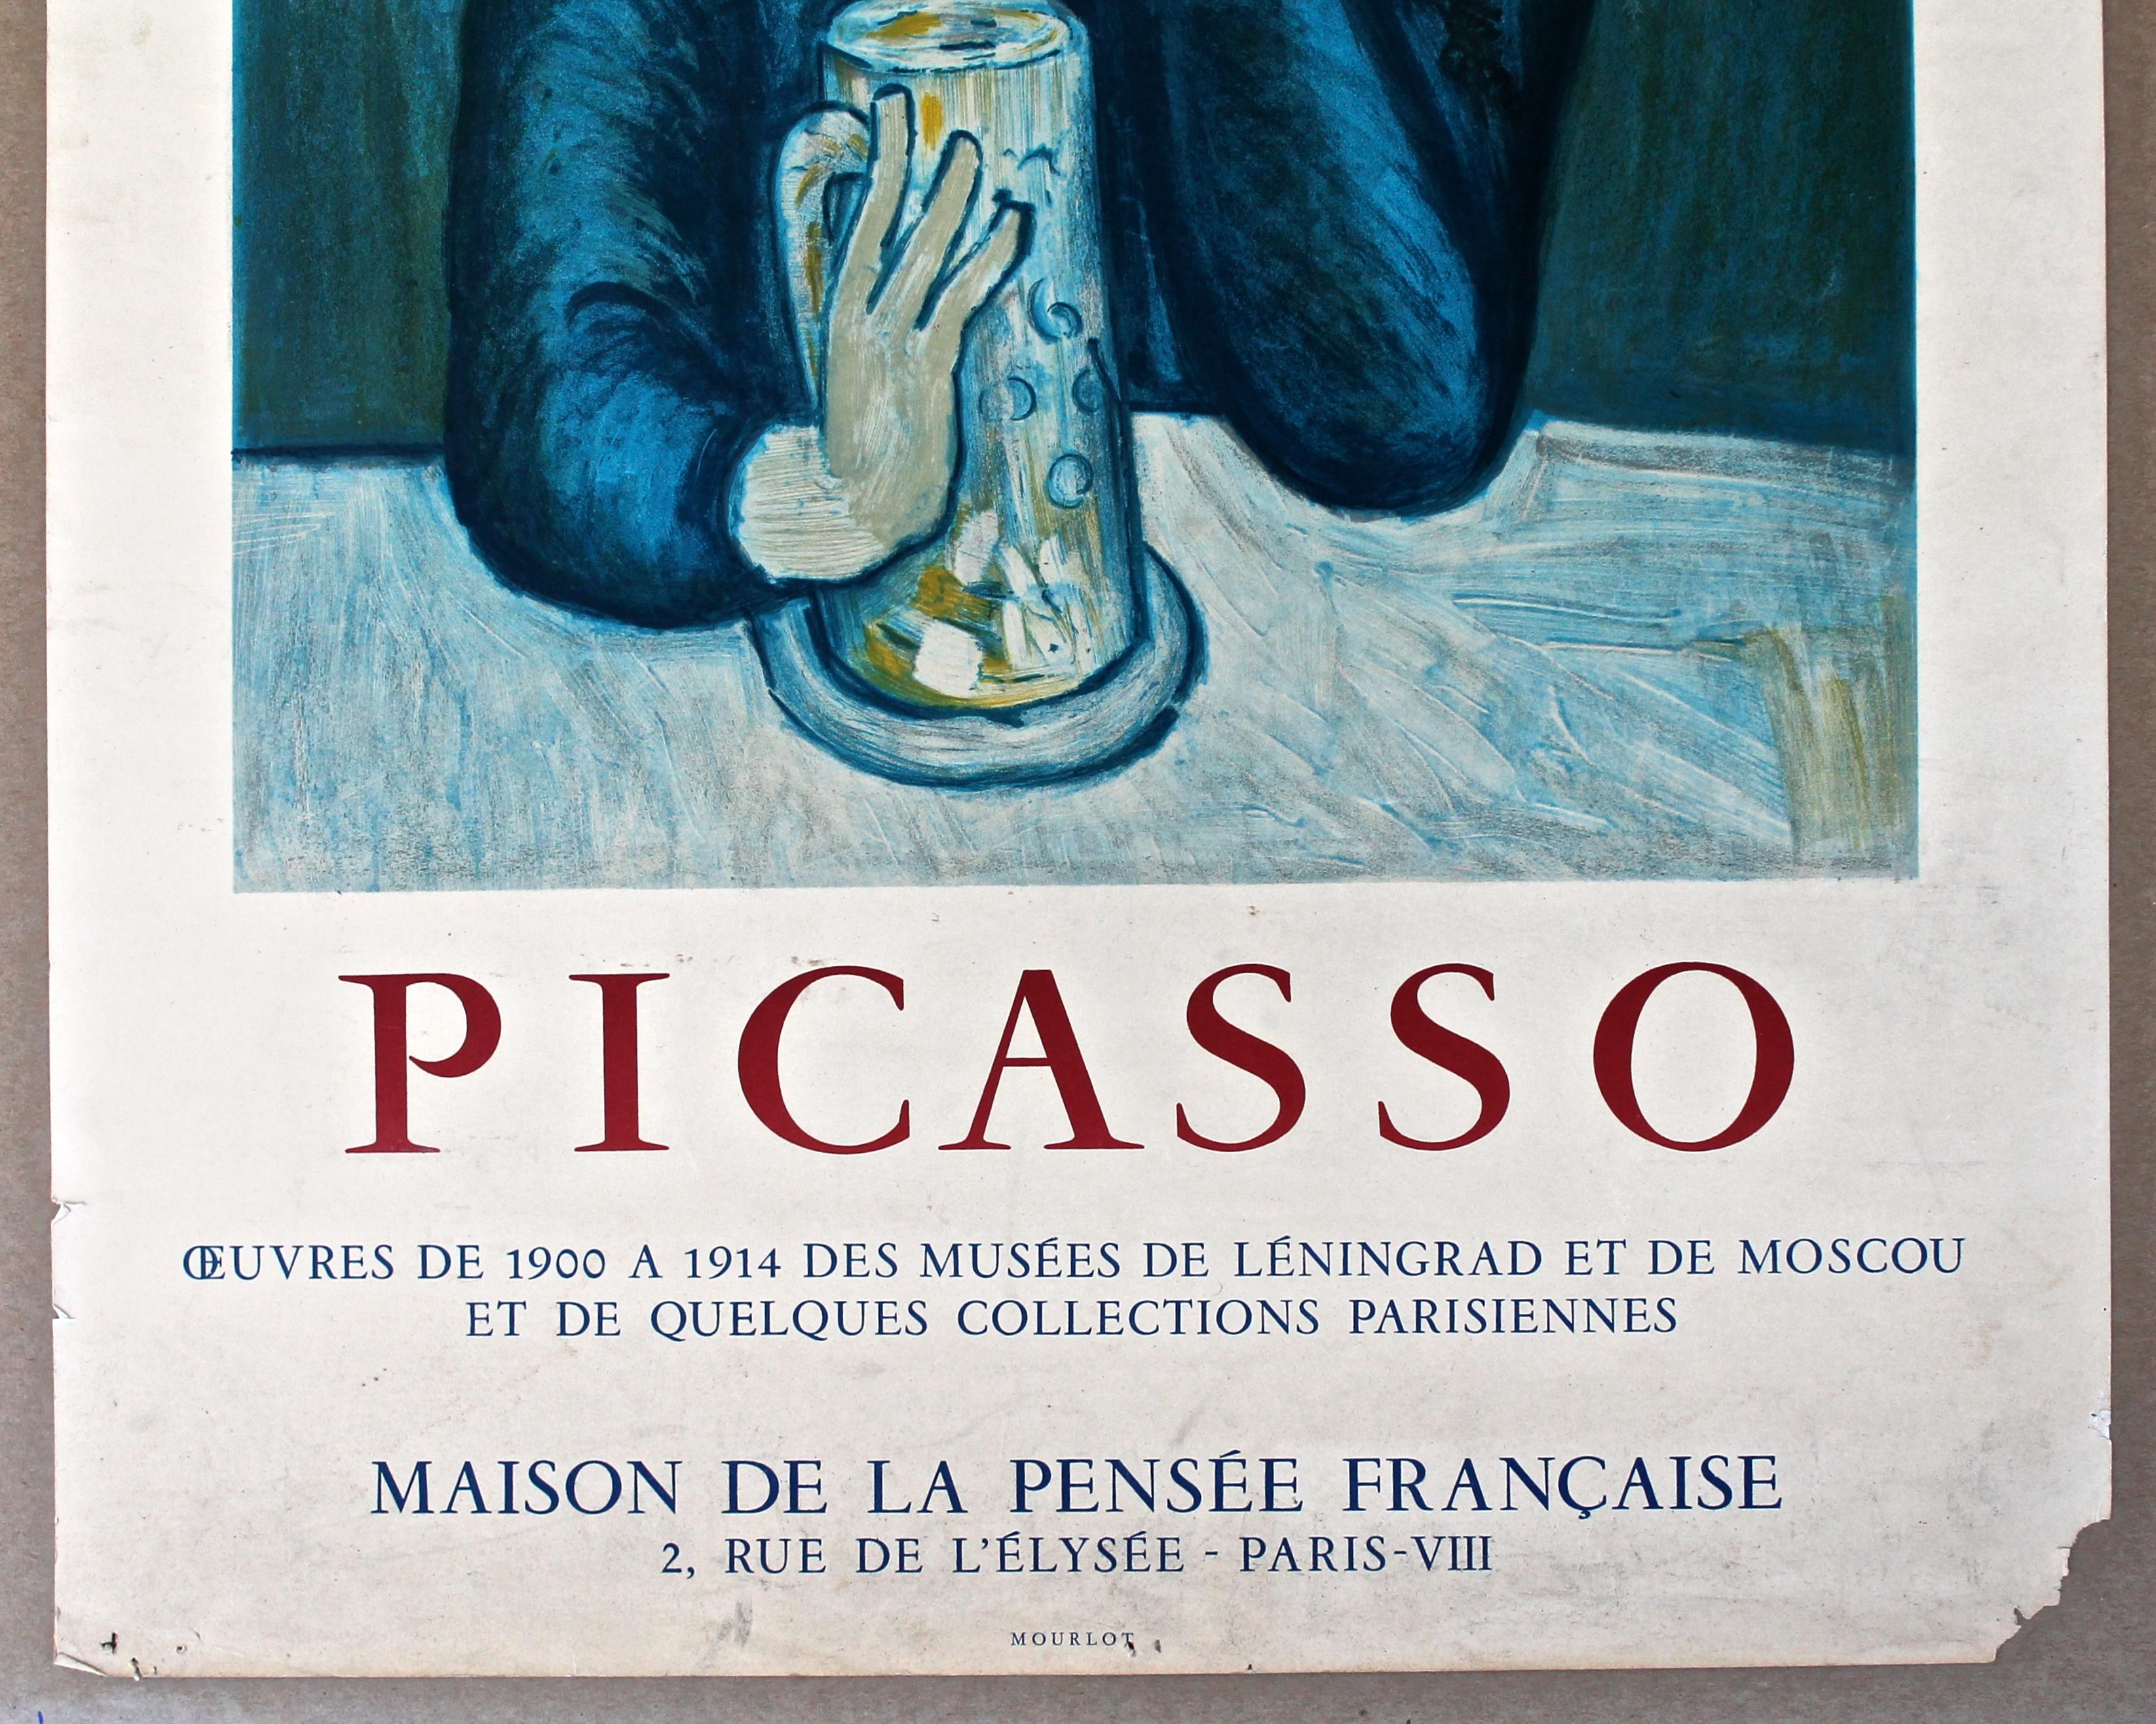 Expressionist Pablo Picasso 1954 Mourlot Poster reproducing a 'Blue Period' Painting For Sale